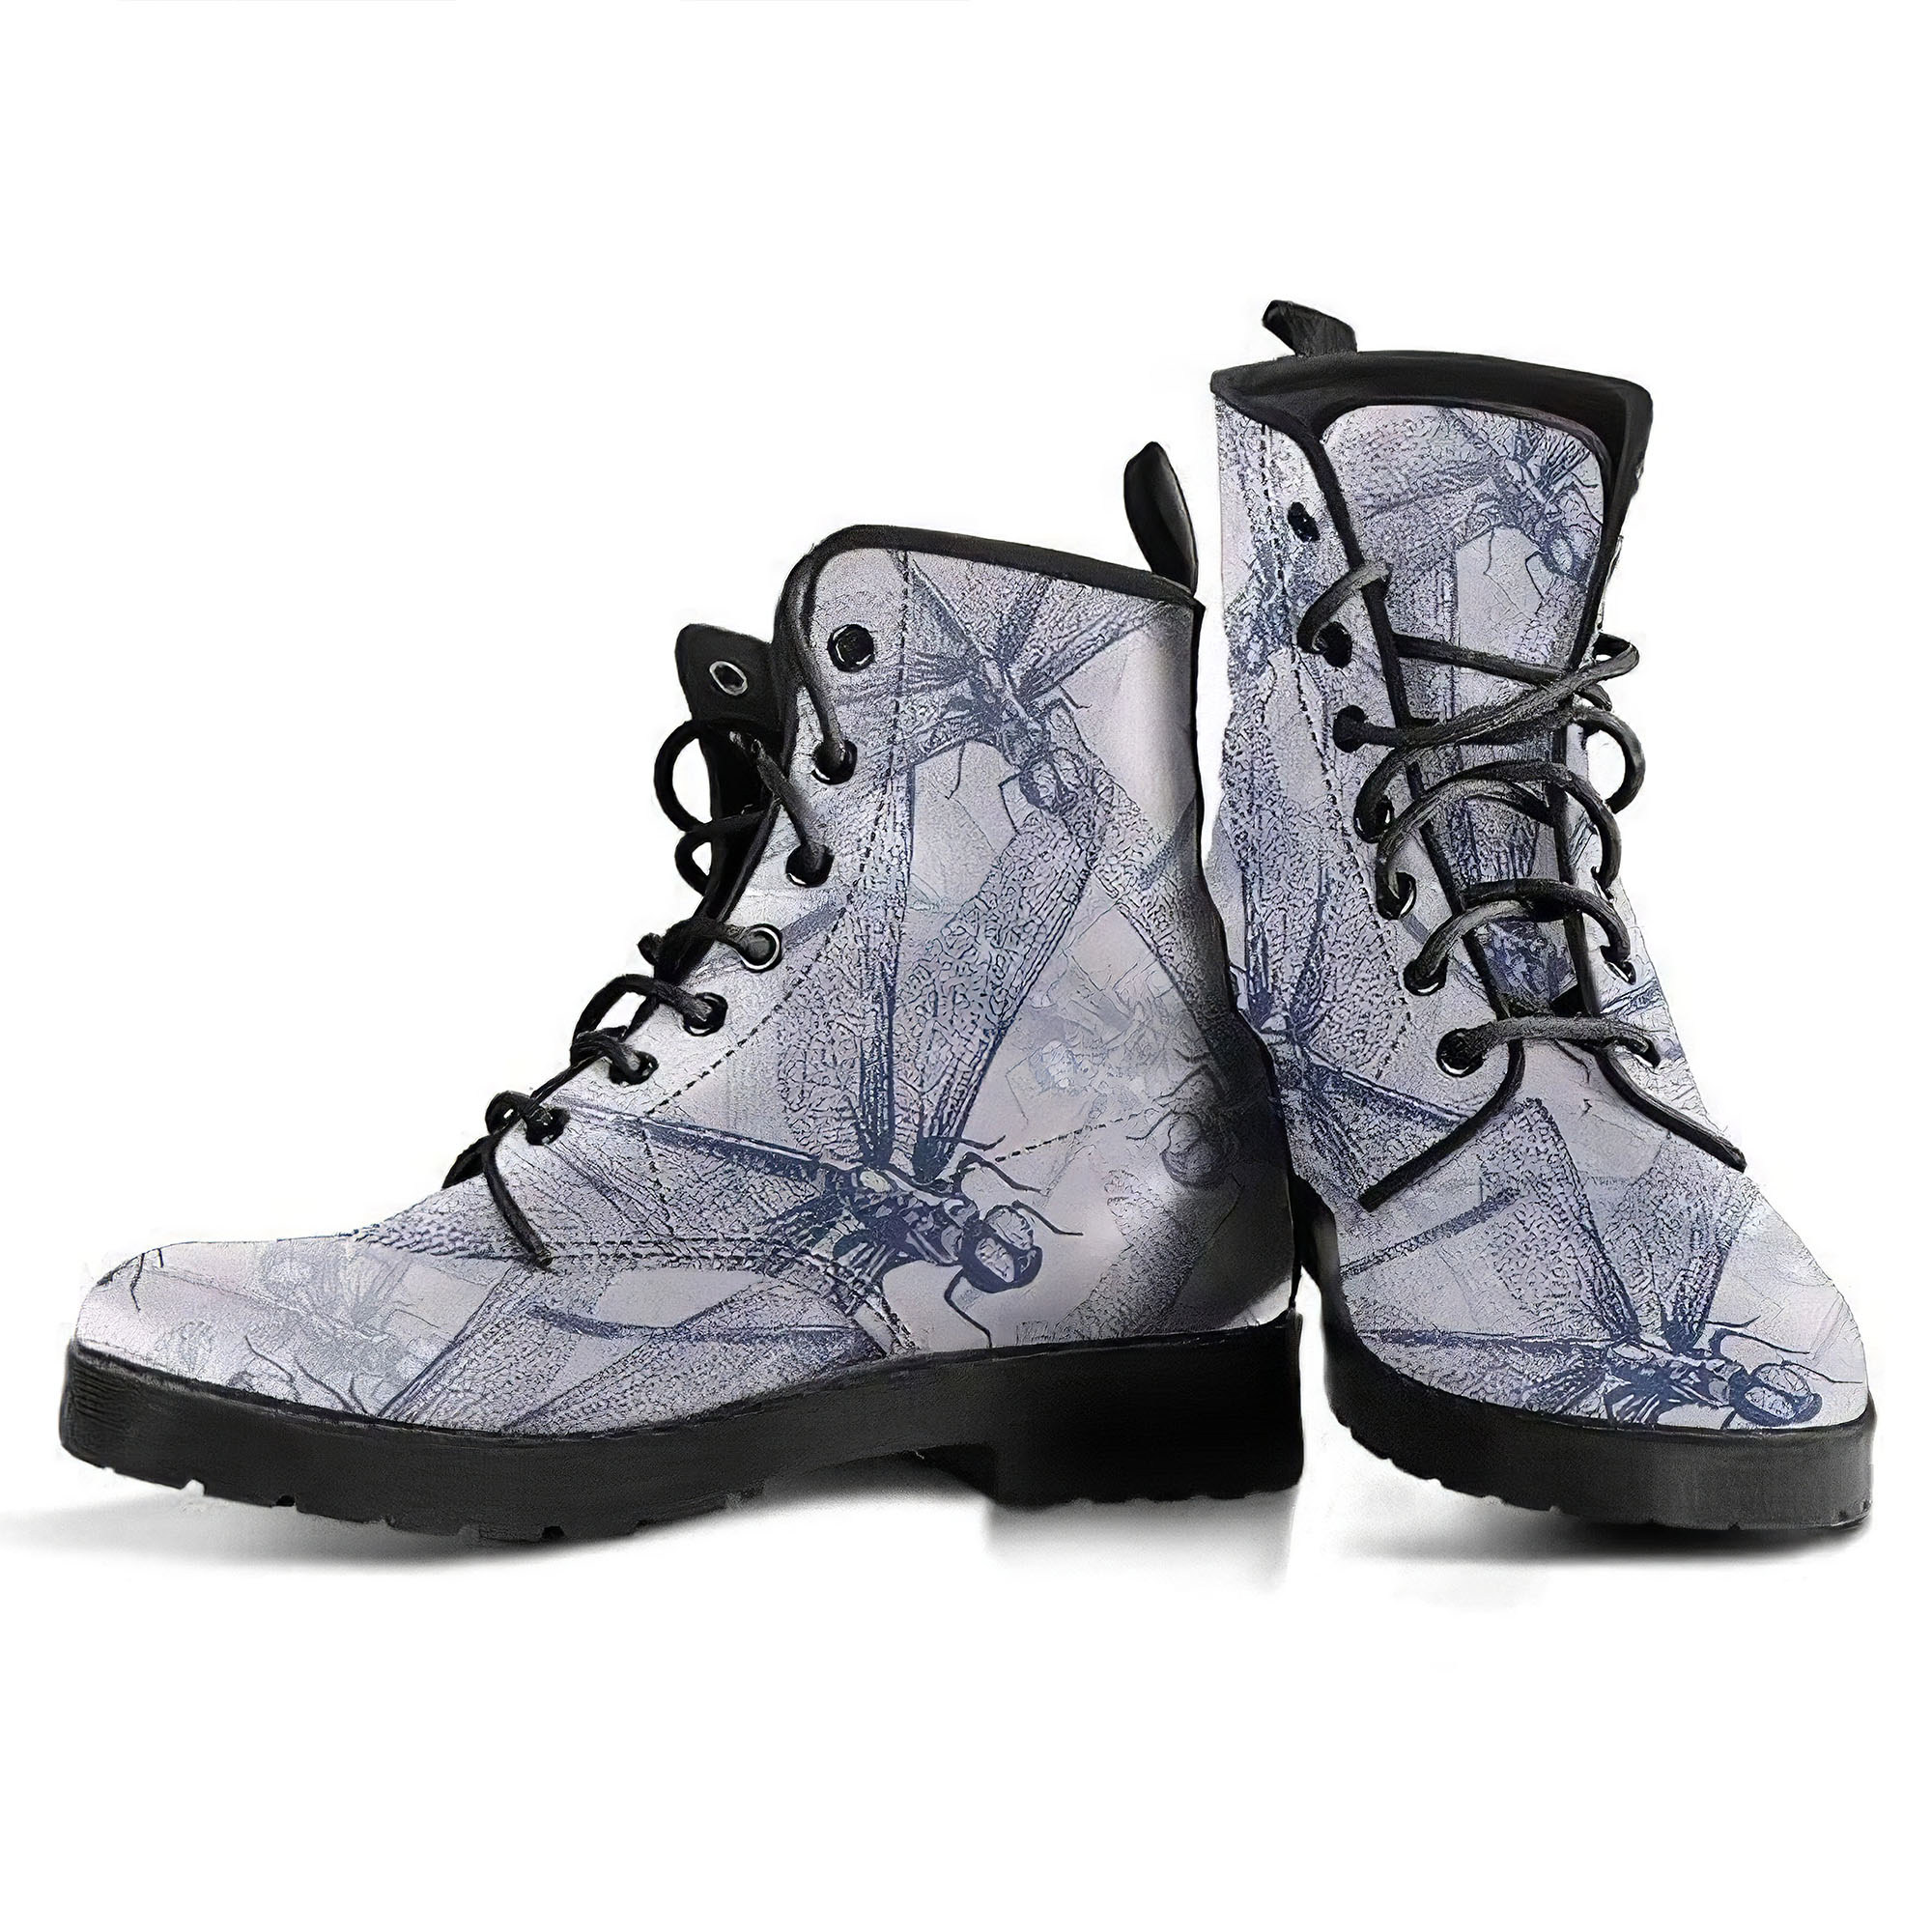 blue-dragonfly-handcrafted-boots-gp-main.jpg